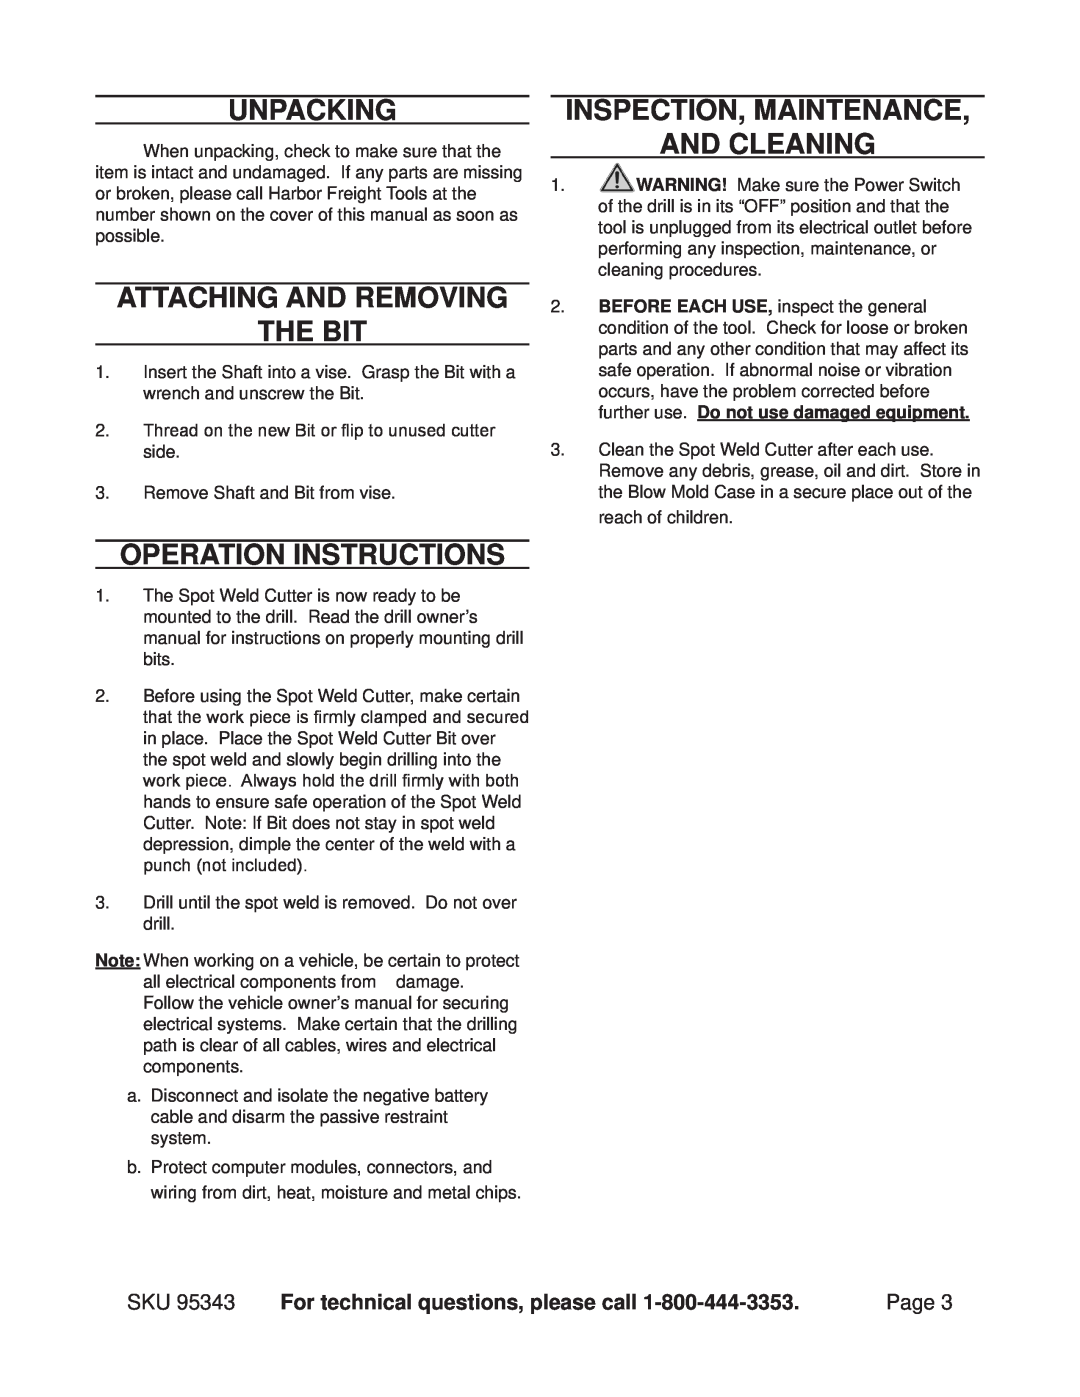 Harbor Freight Tools 95343 manual Unpacking, Attaching and Removing the Bit, Operation Instructions, Page 